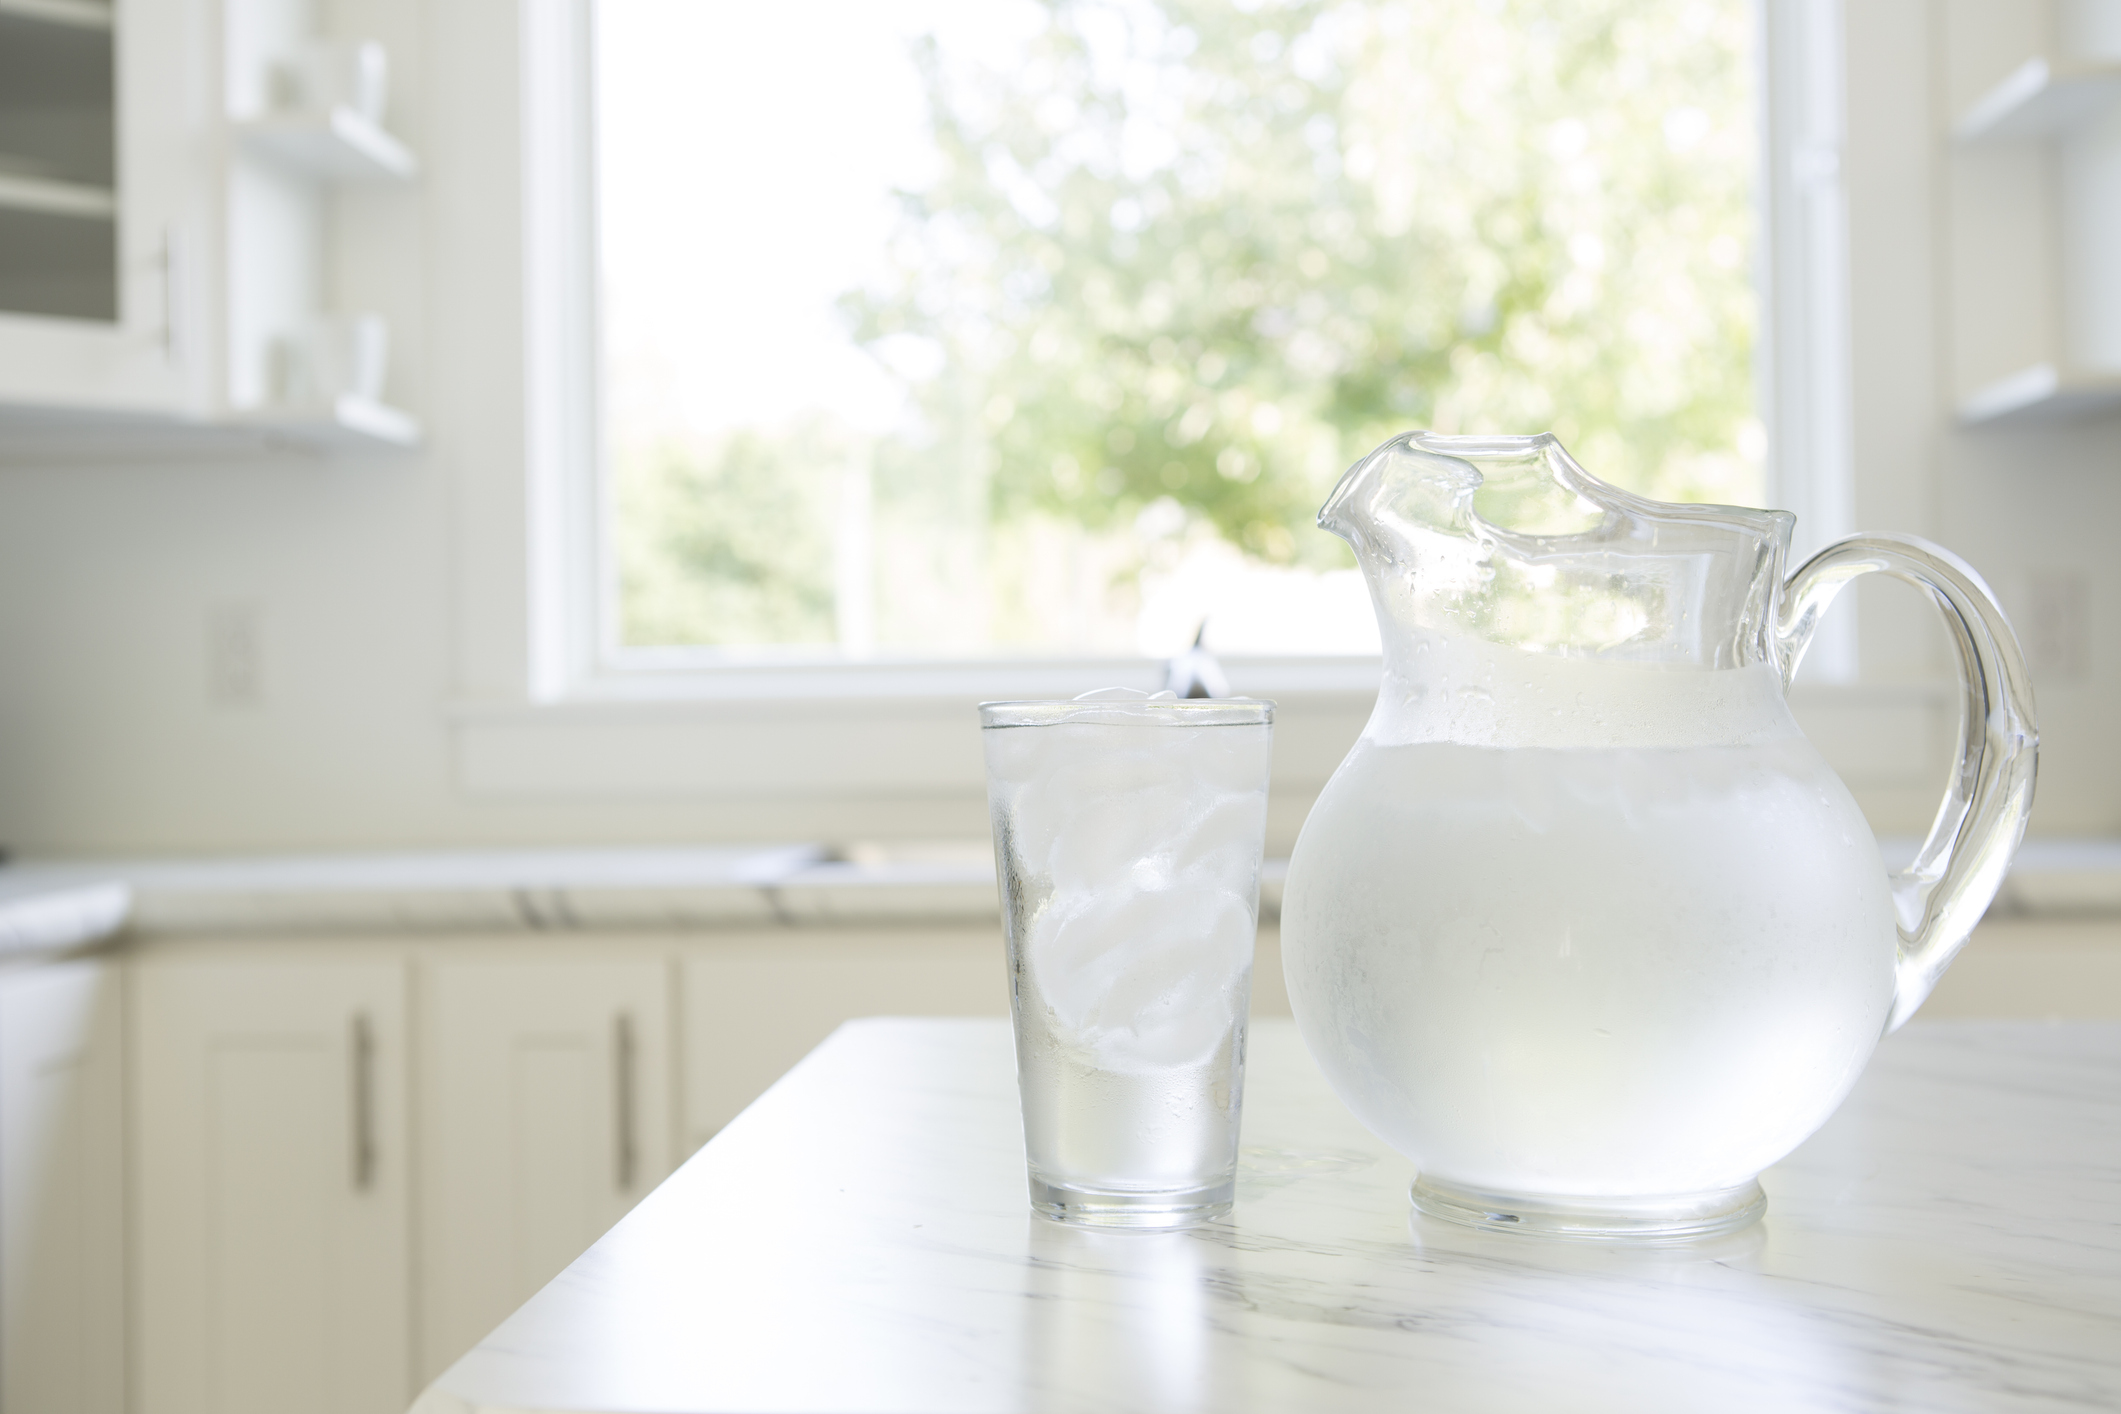 A water pitcher and cold glass of water on a kitchen countertop